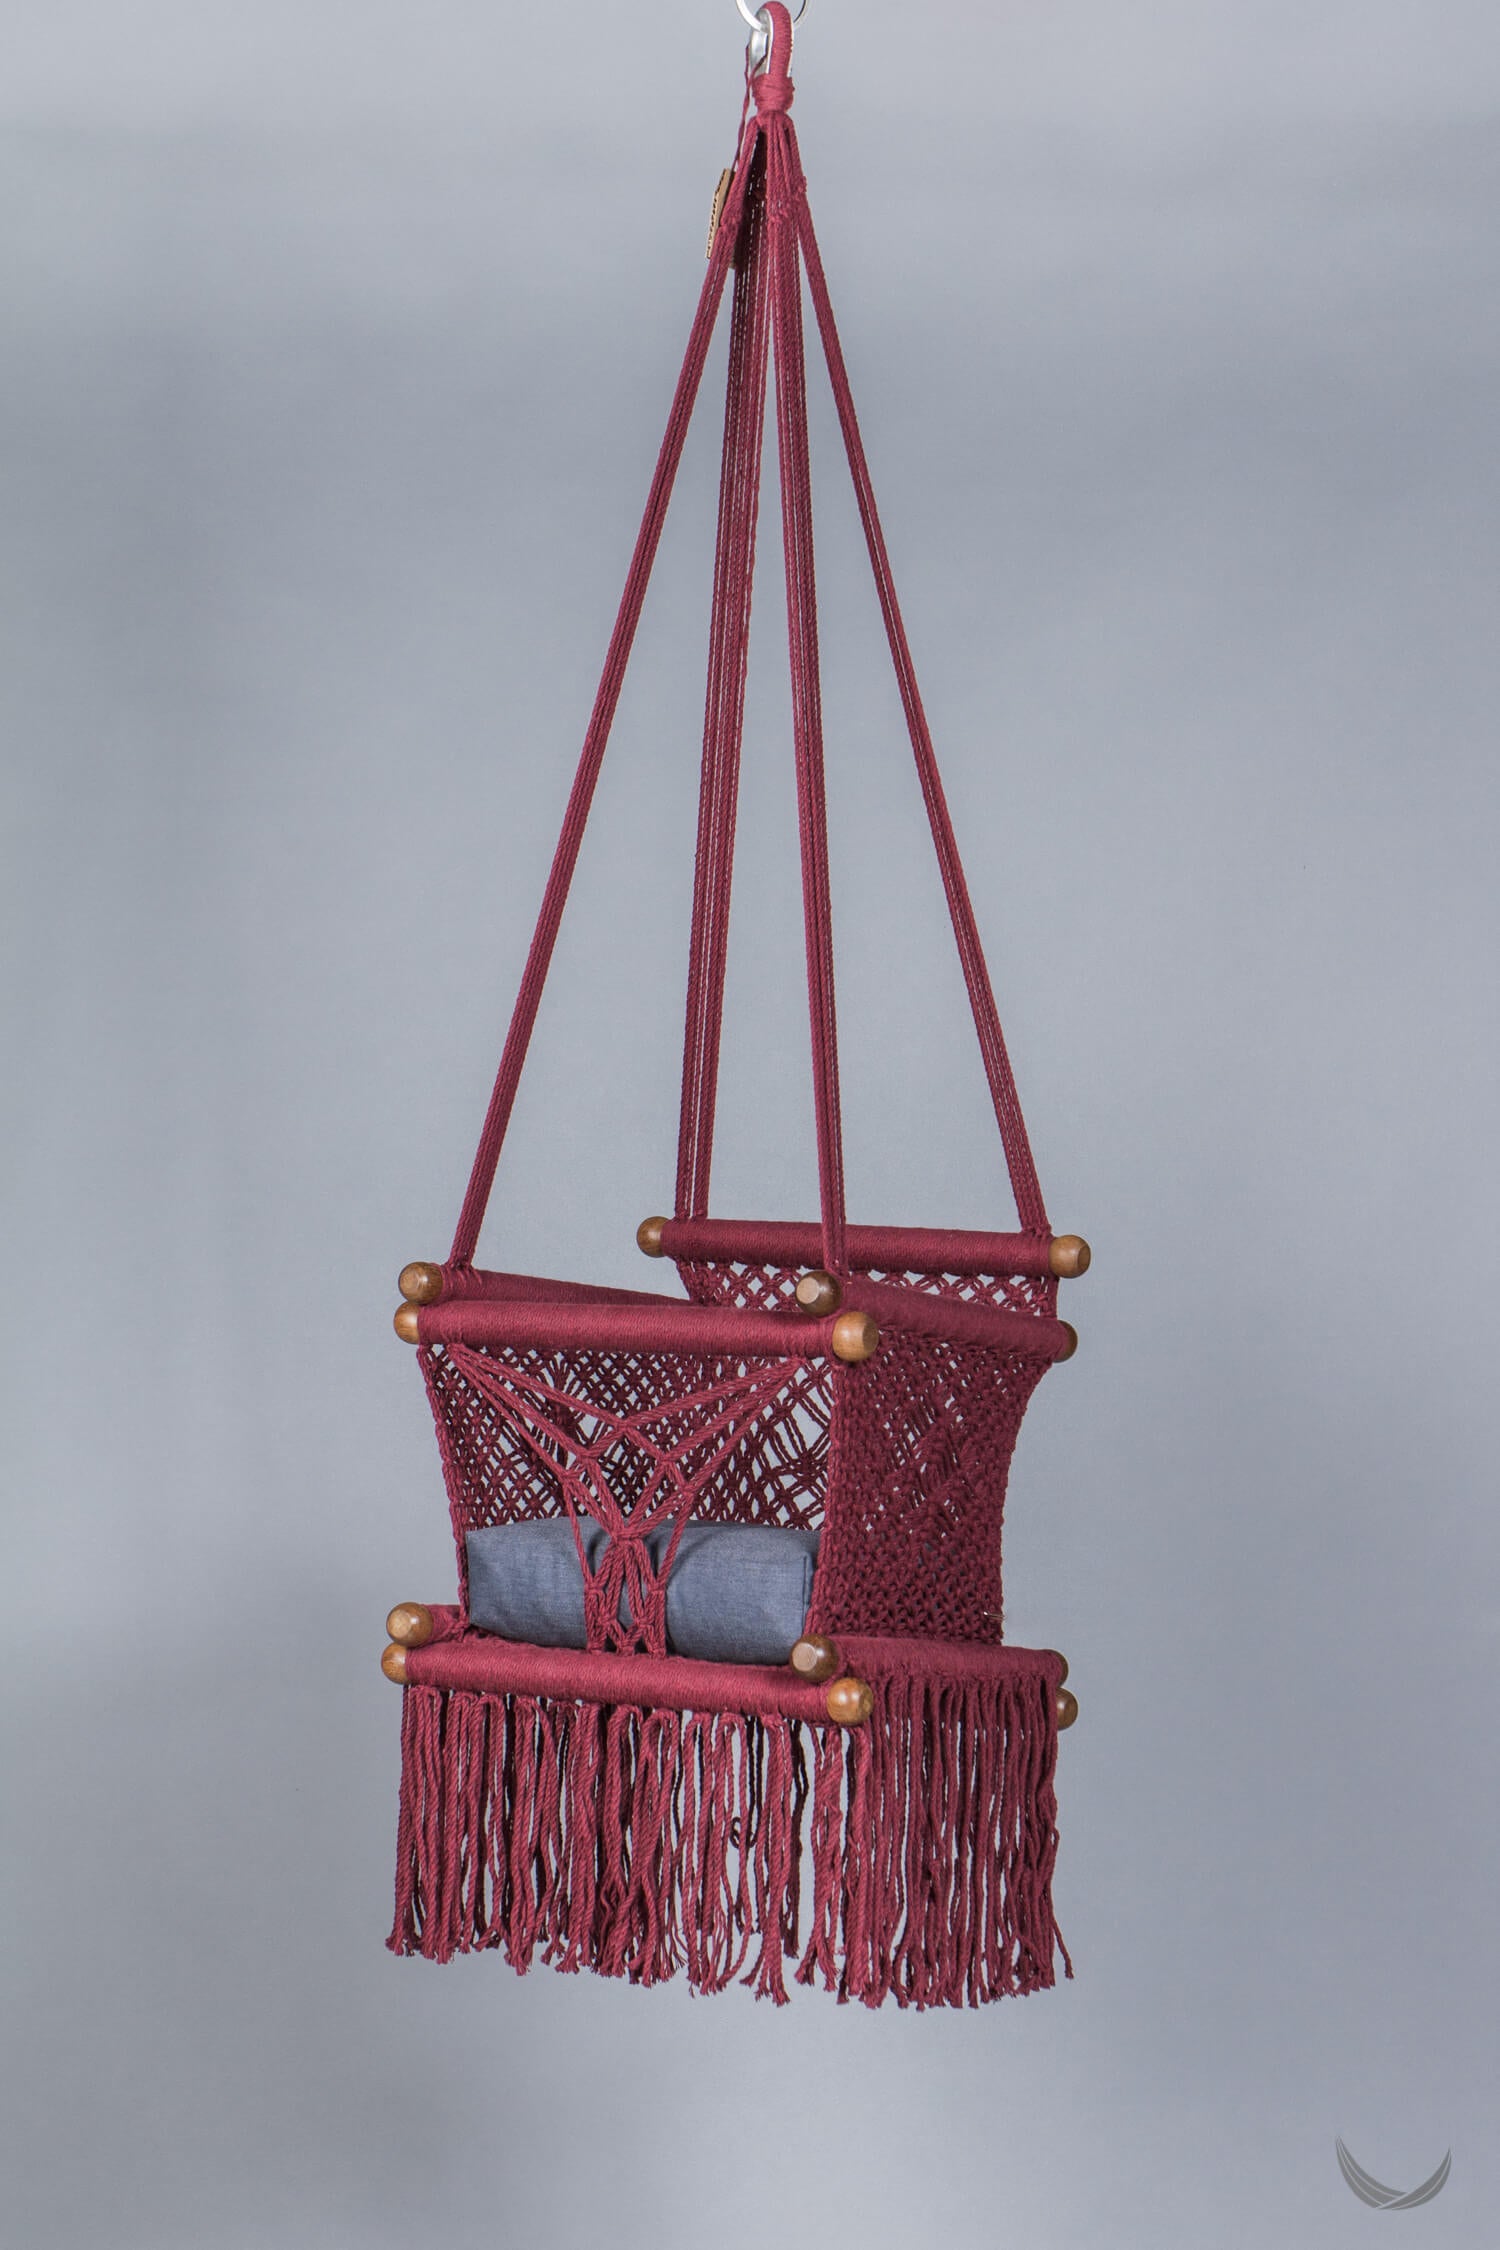 macrame swing  in bordeaux with blue cushion